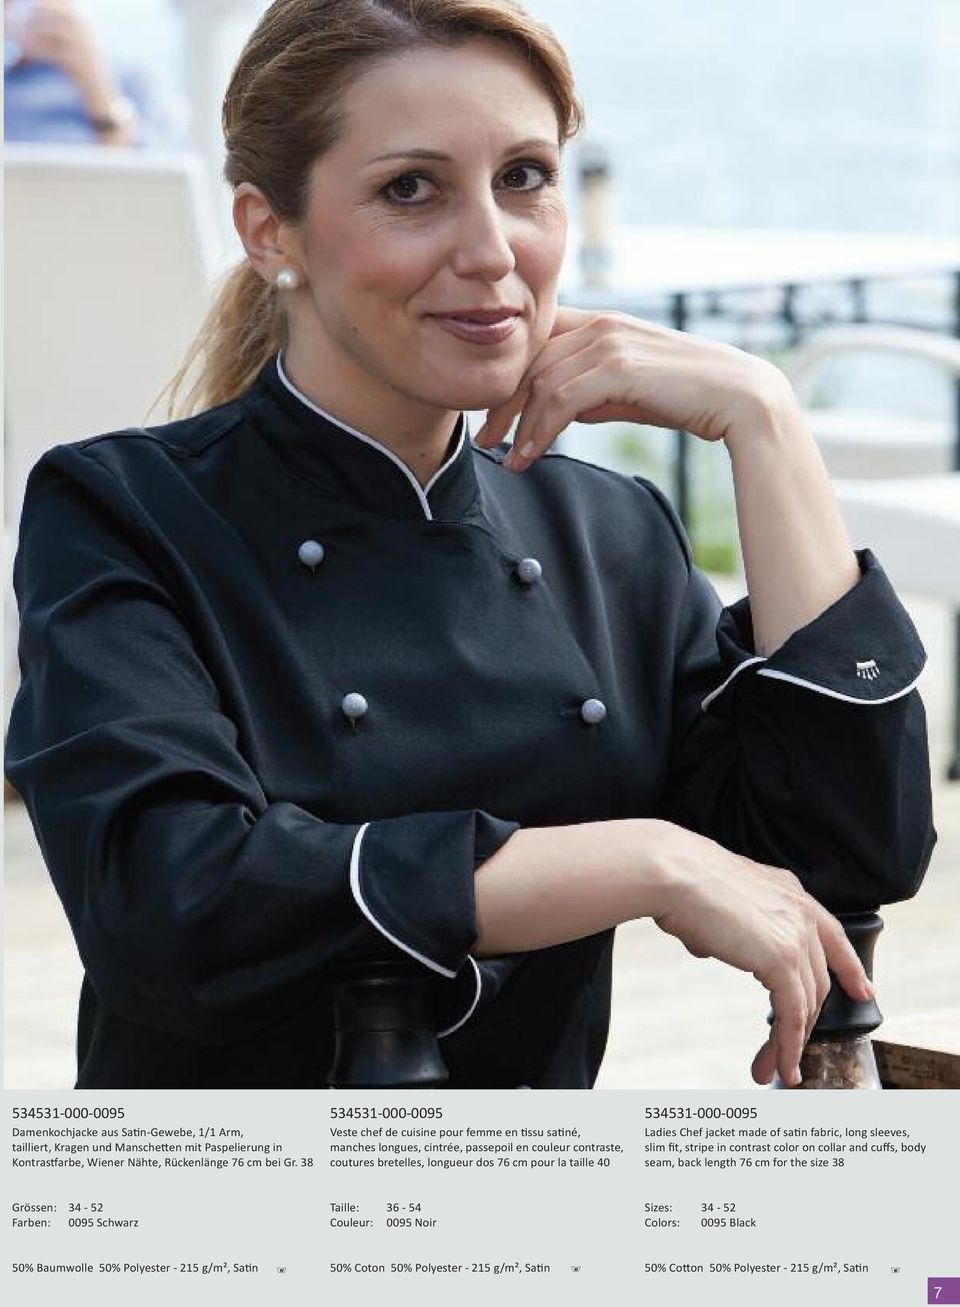 534531-000-0095 Ladies Chef jacket made of sa n fabric, long sleeves, slim fit, stripe in contrast color on collar and cuffs, body seam, back length 76 cm for the size 38 Grössen: 34-52